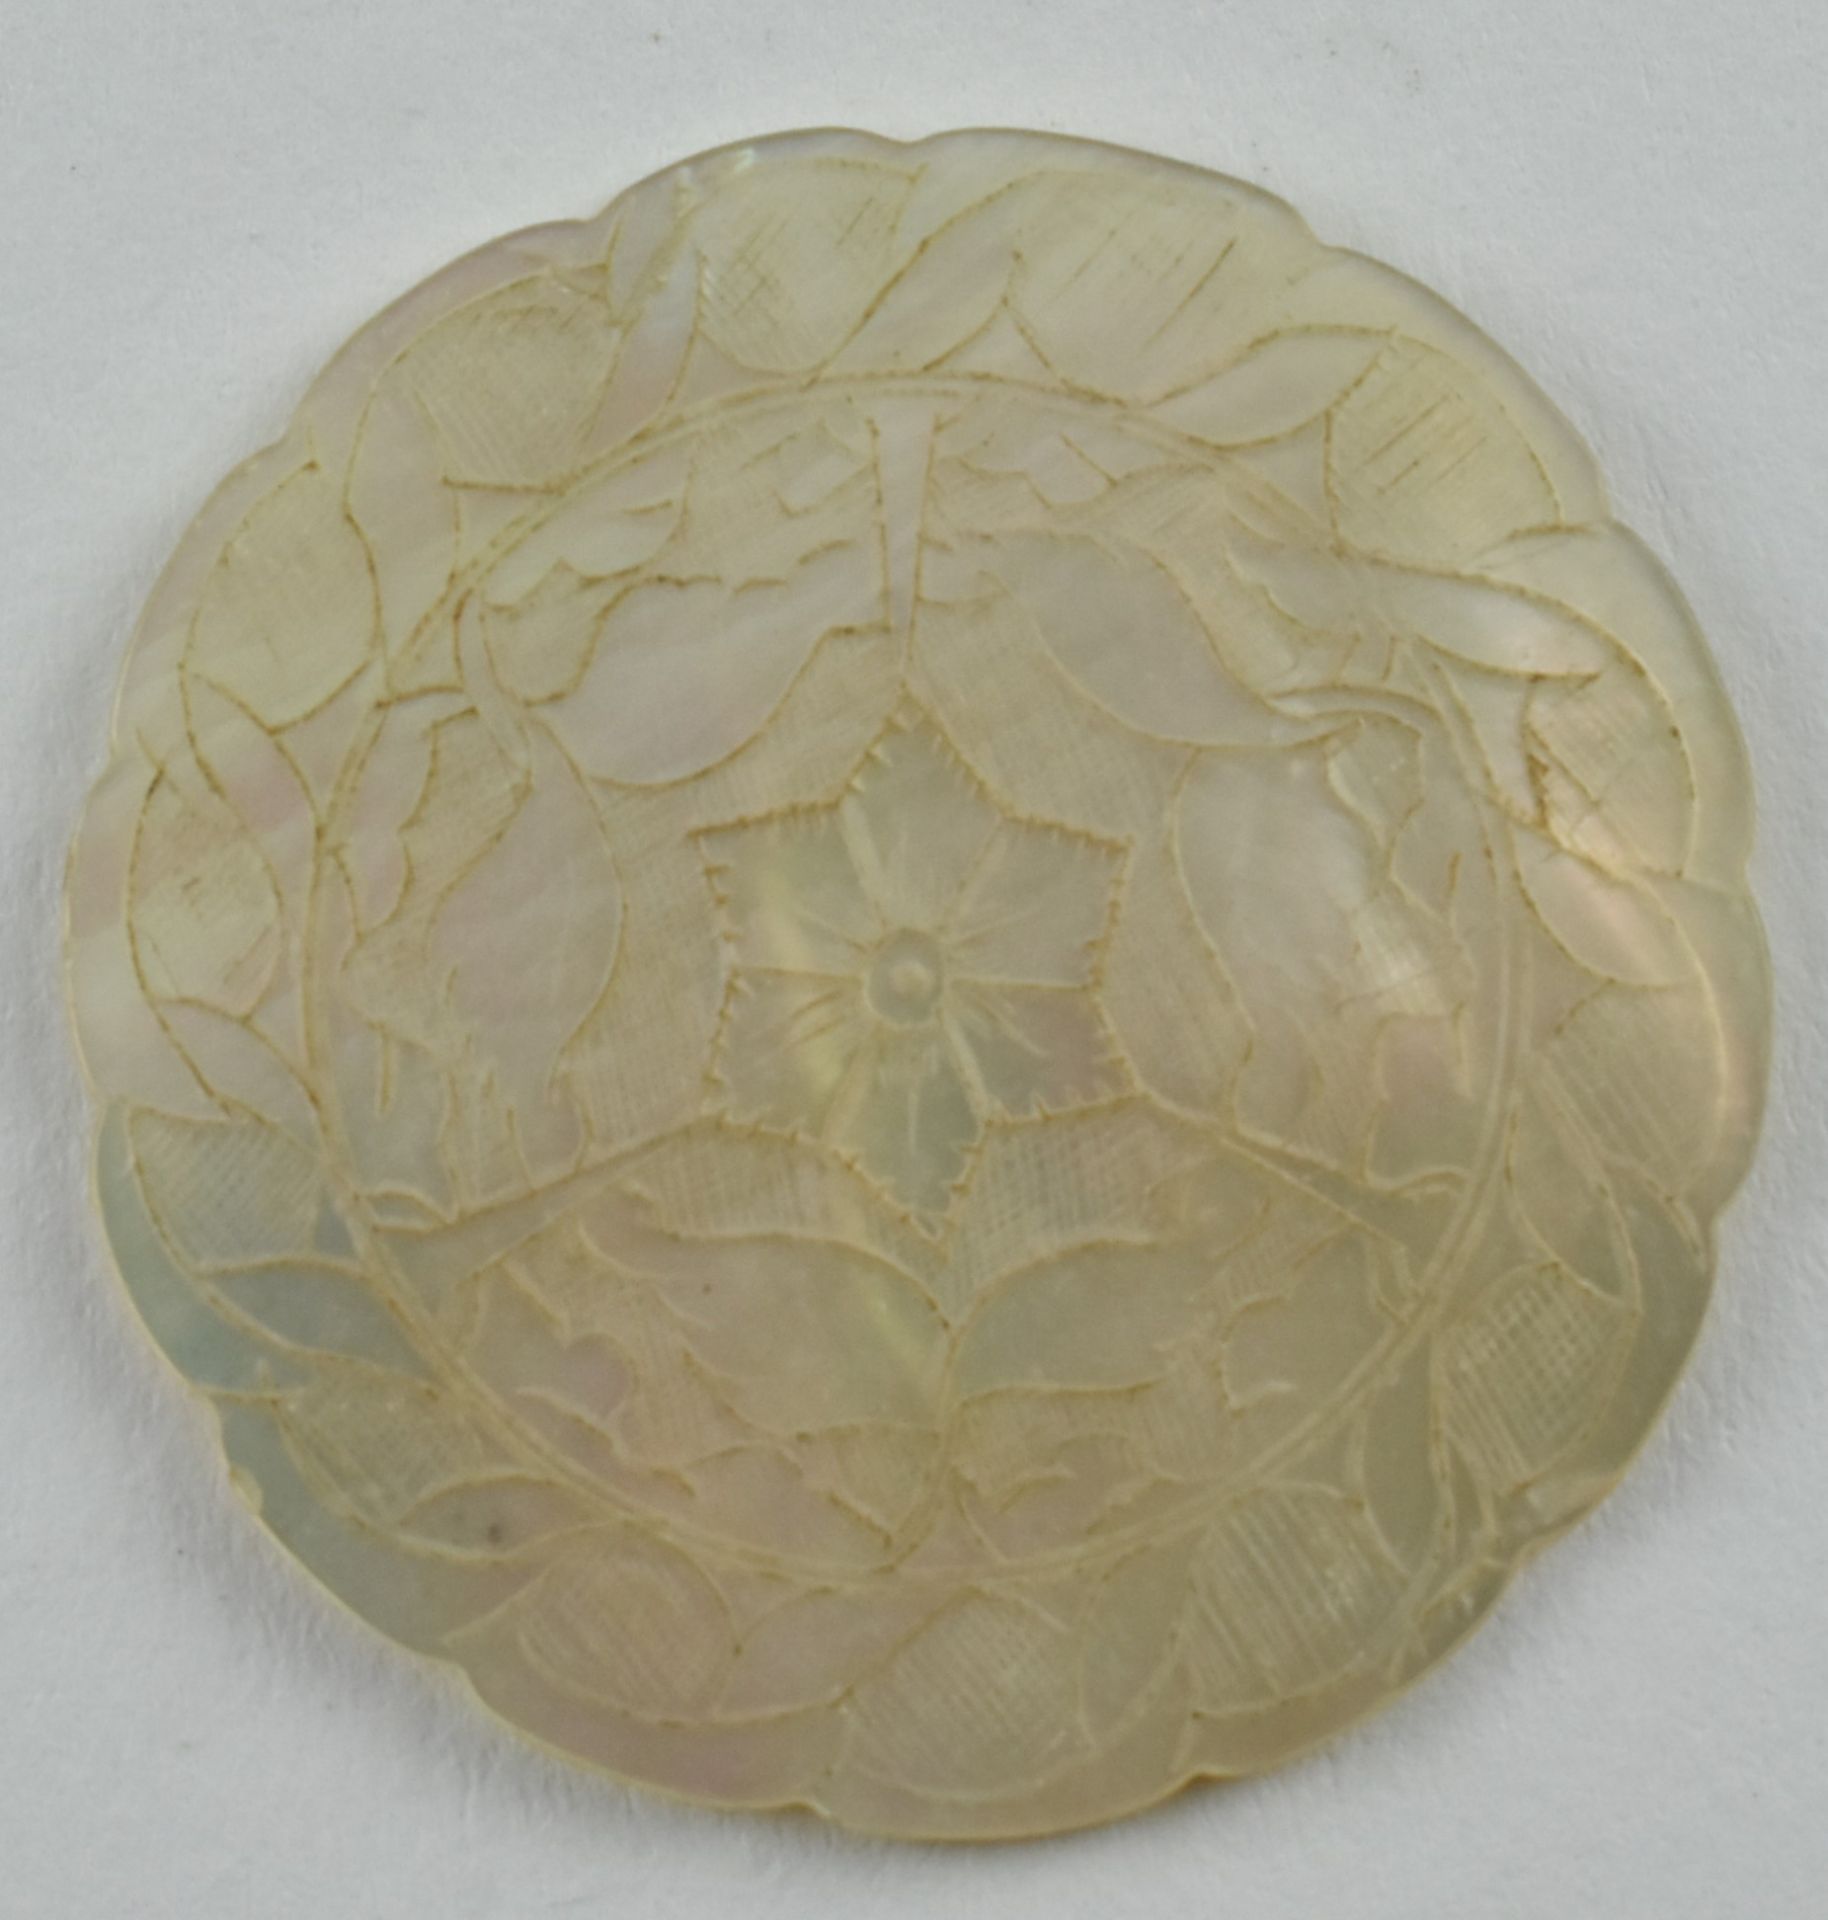 QING DYNASTY MOTHER OF PEARL GAMING TOKENS 清十三行贝母筹码 - Image 8 of 11